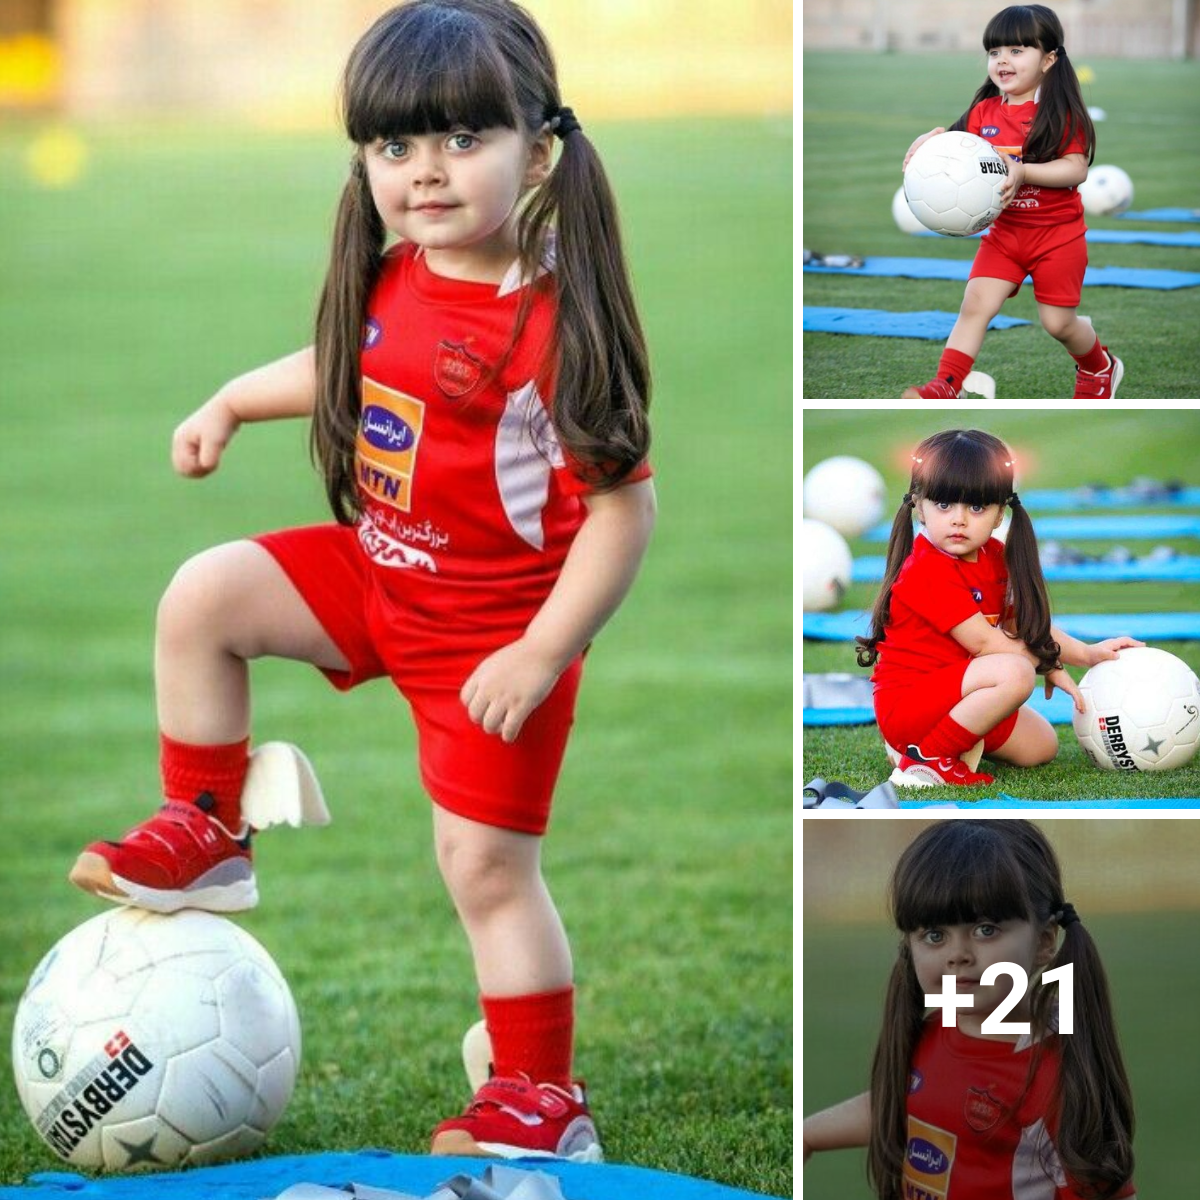 In the future, my little angel hopes to become a female soccer player. Let’s hope that her dream comes true!